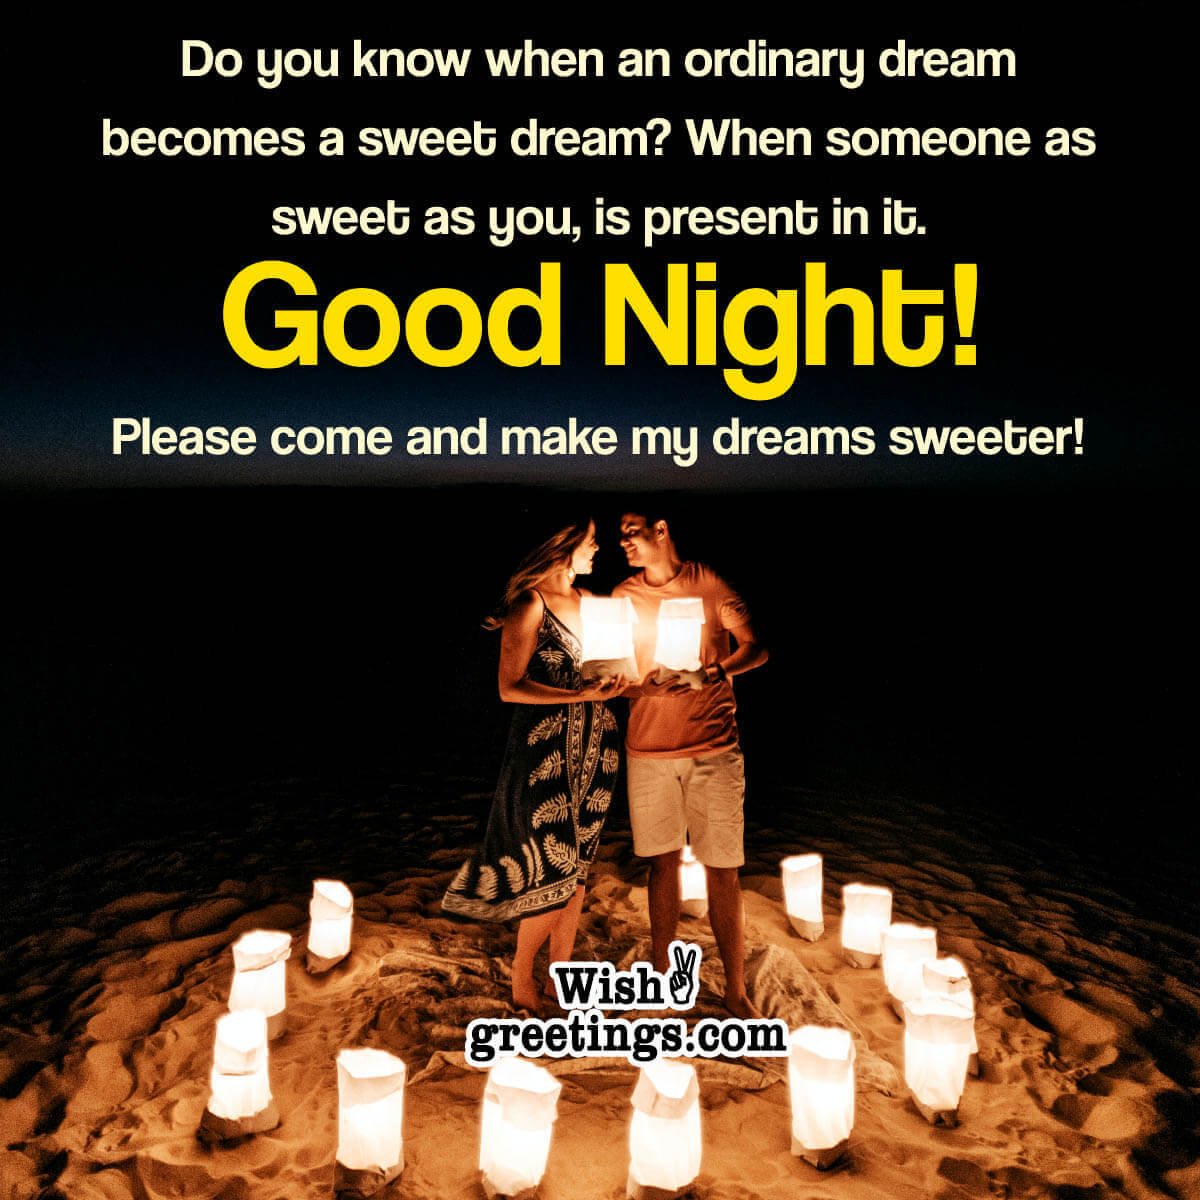 Good Night Messages - Wish Greetings